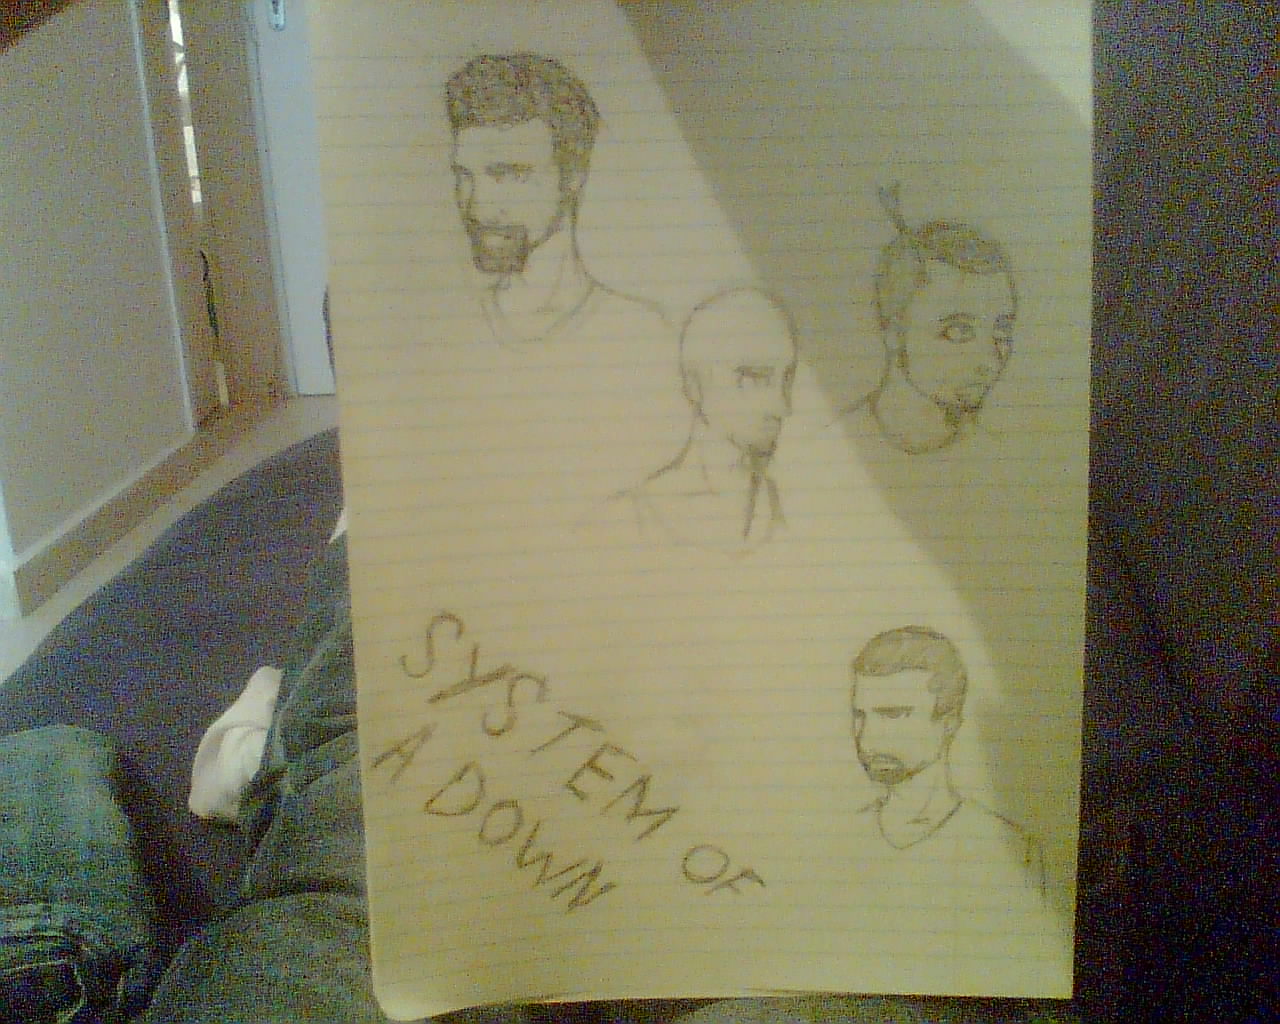 system of a down by niv